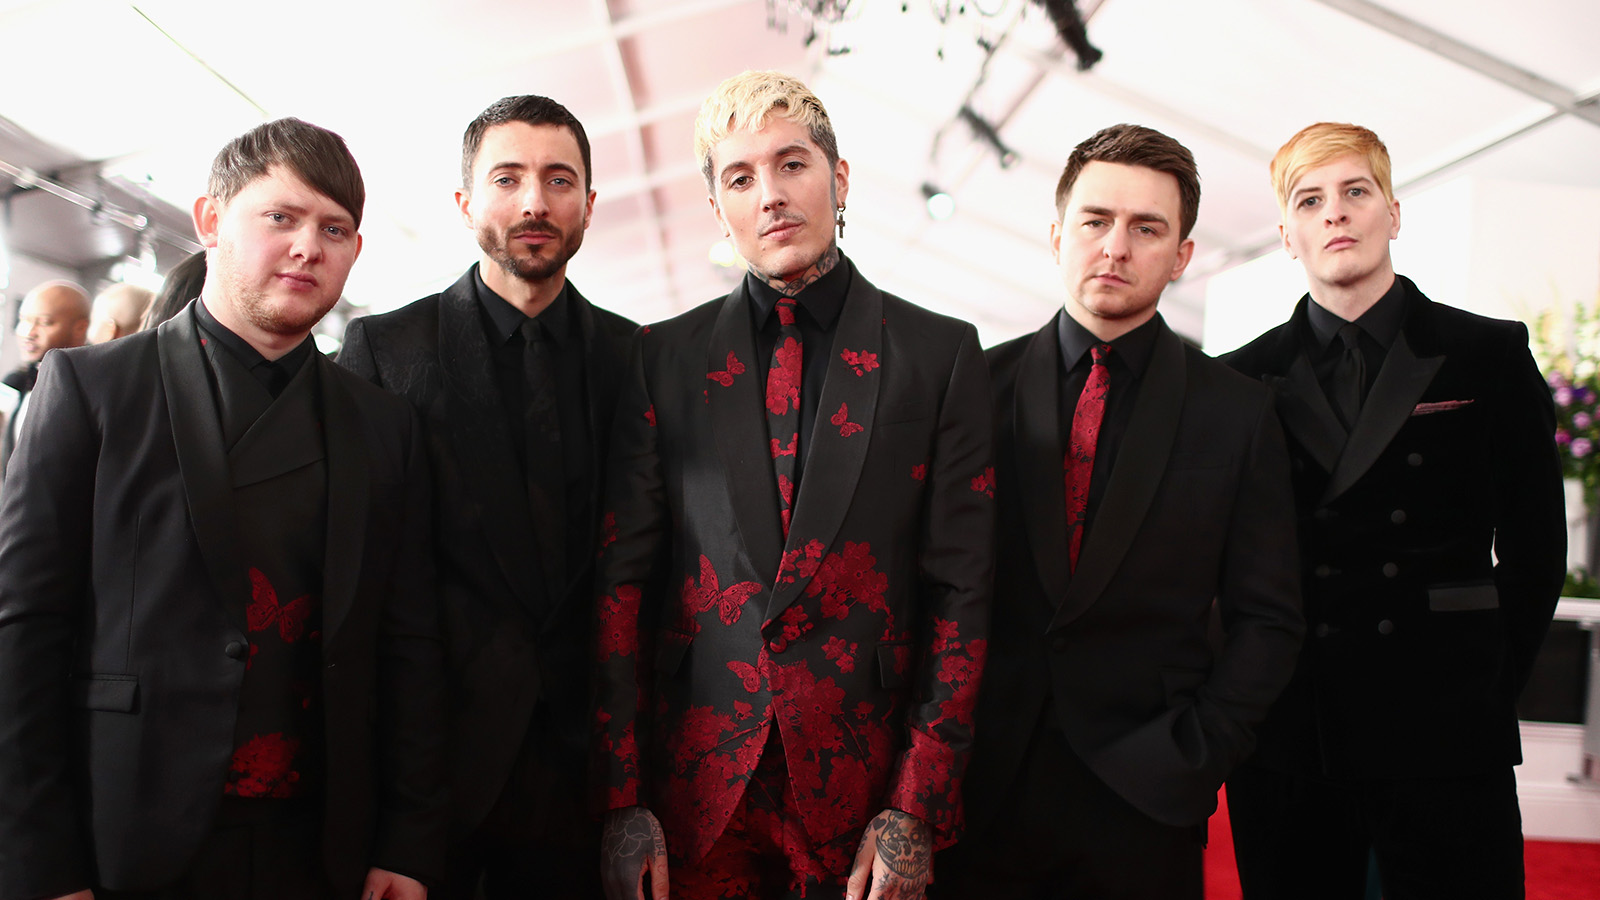 Metal Artists on 2019 Grammys Red Carpet: See Pics of BMTH, Deafheaven, Trivium, More ...